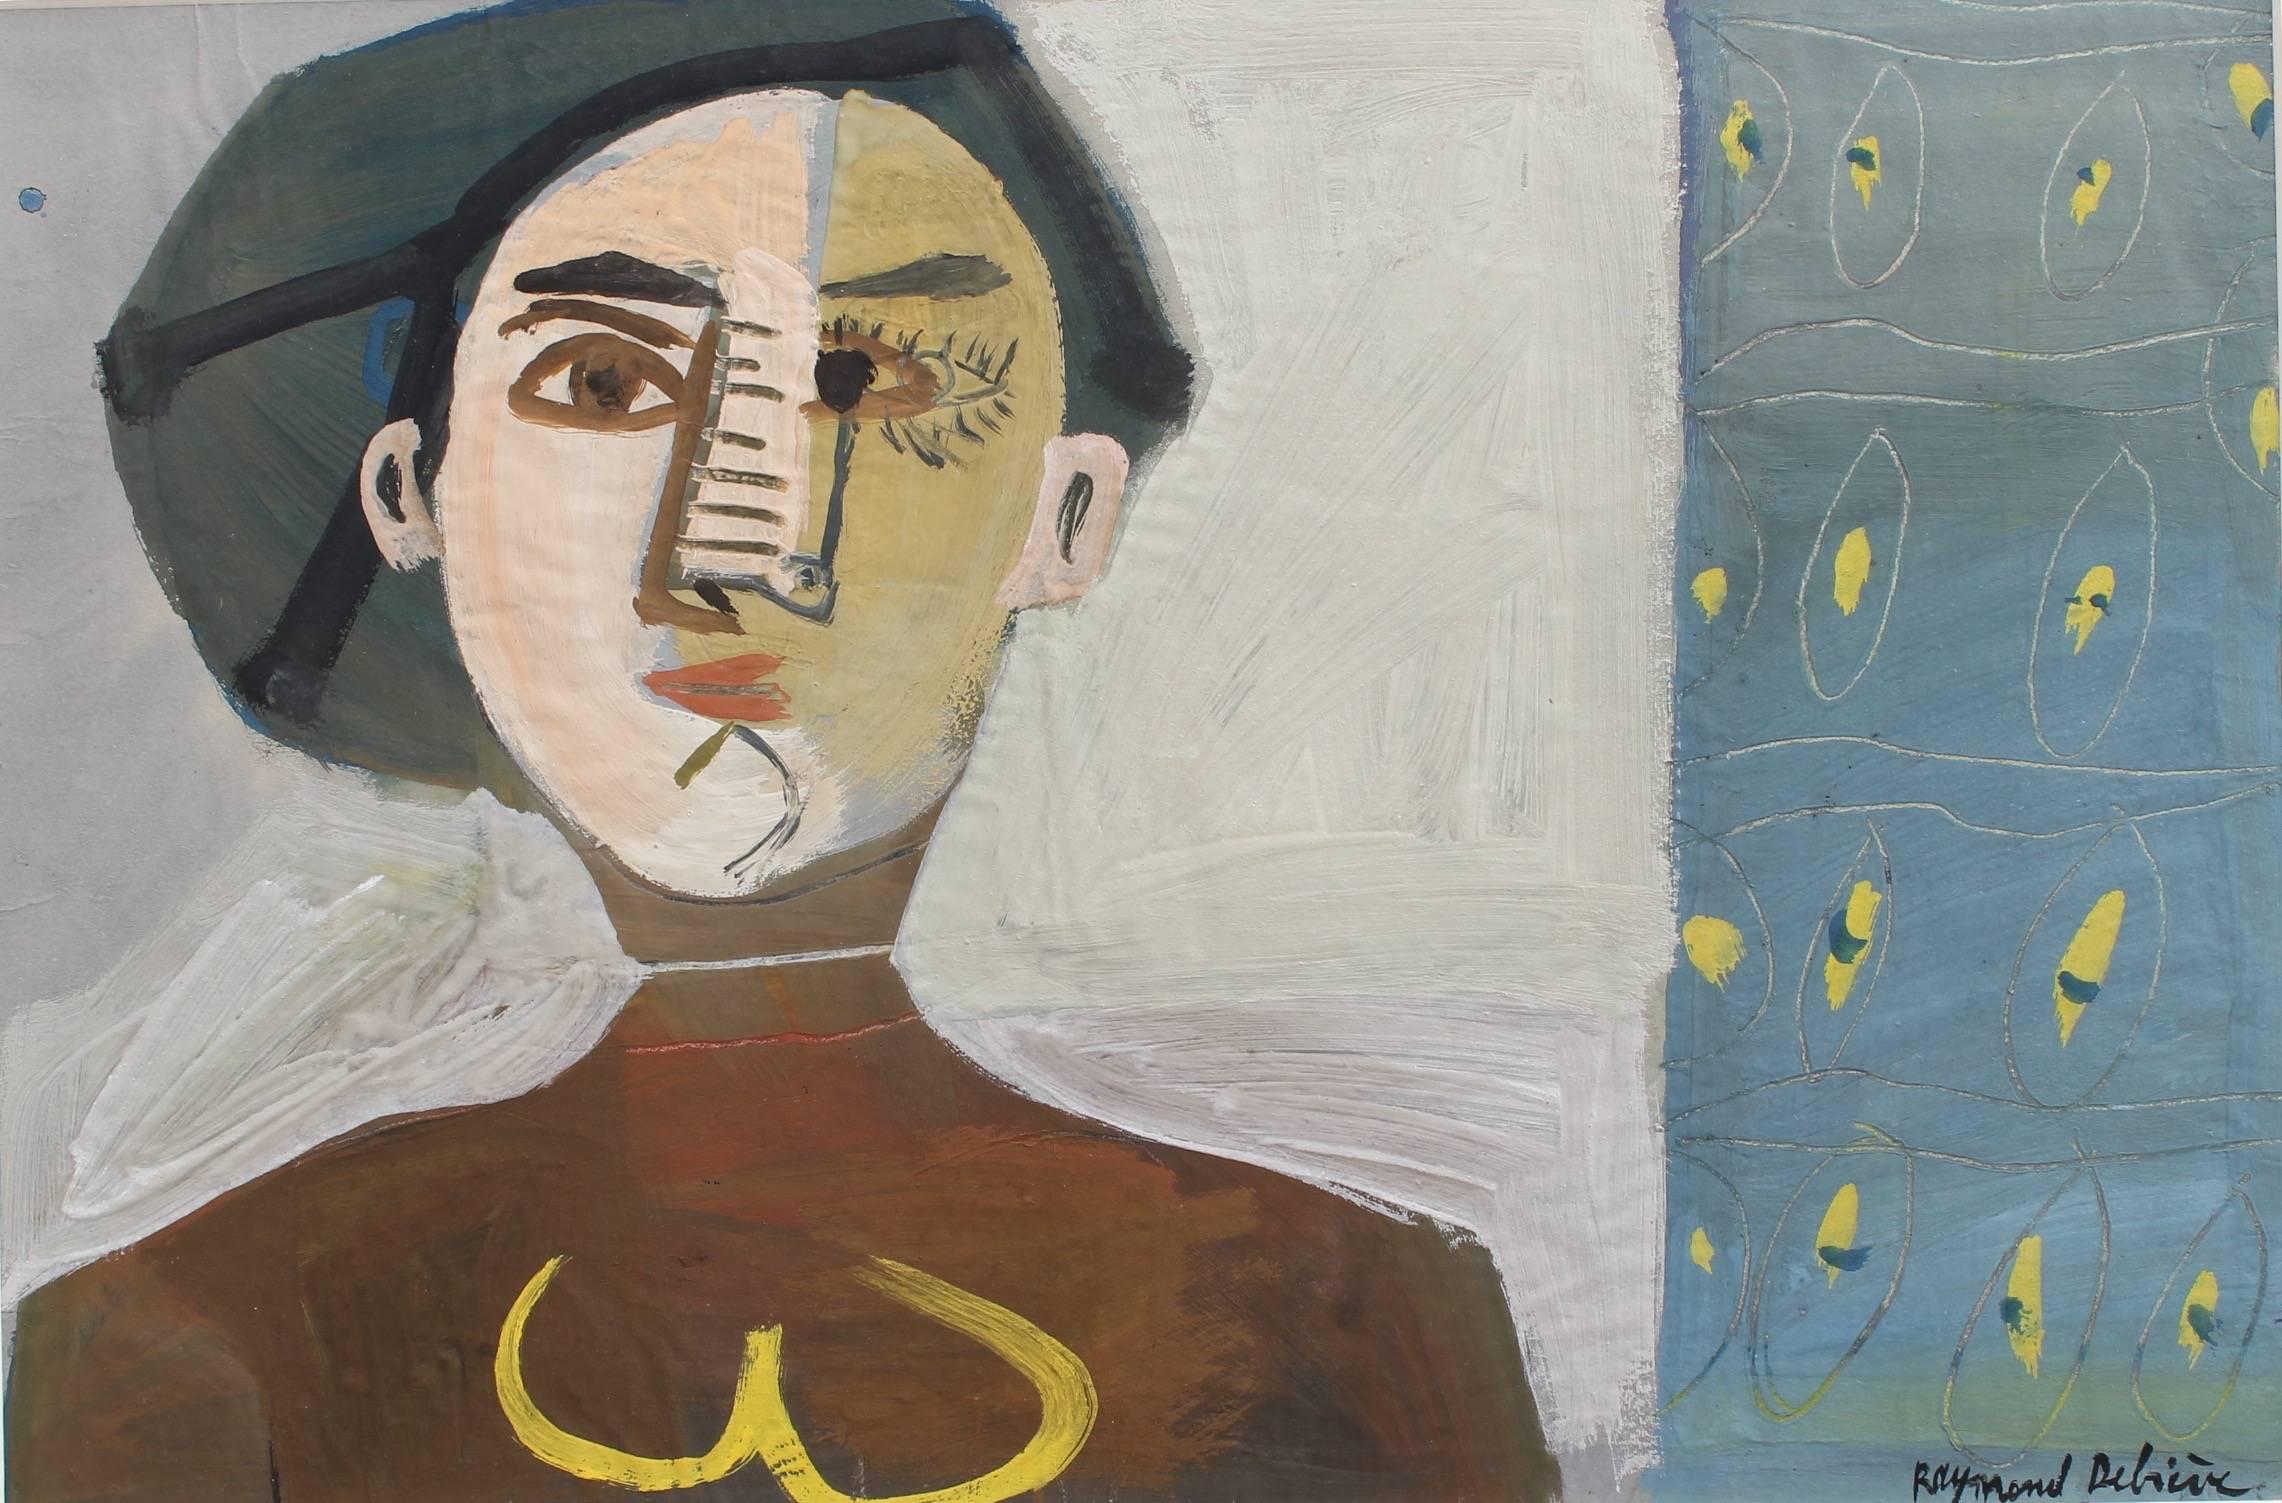 'Portrait of a Post-Cubist Woman', gouache on paper (circa 1960s), by Raymond Dèbieve (1931 - 2011). A pattern of mysterious Egyptian-inspired eyes dominate the right side of this painting. The subject is partitioned and angular as she gazes at the